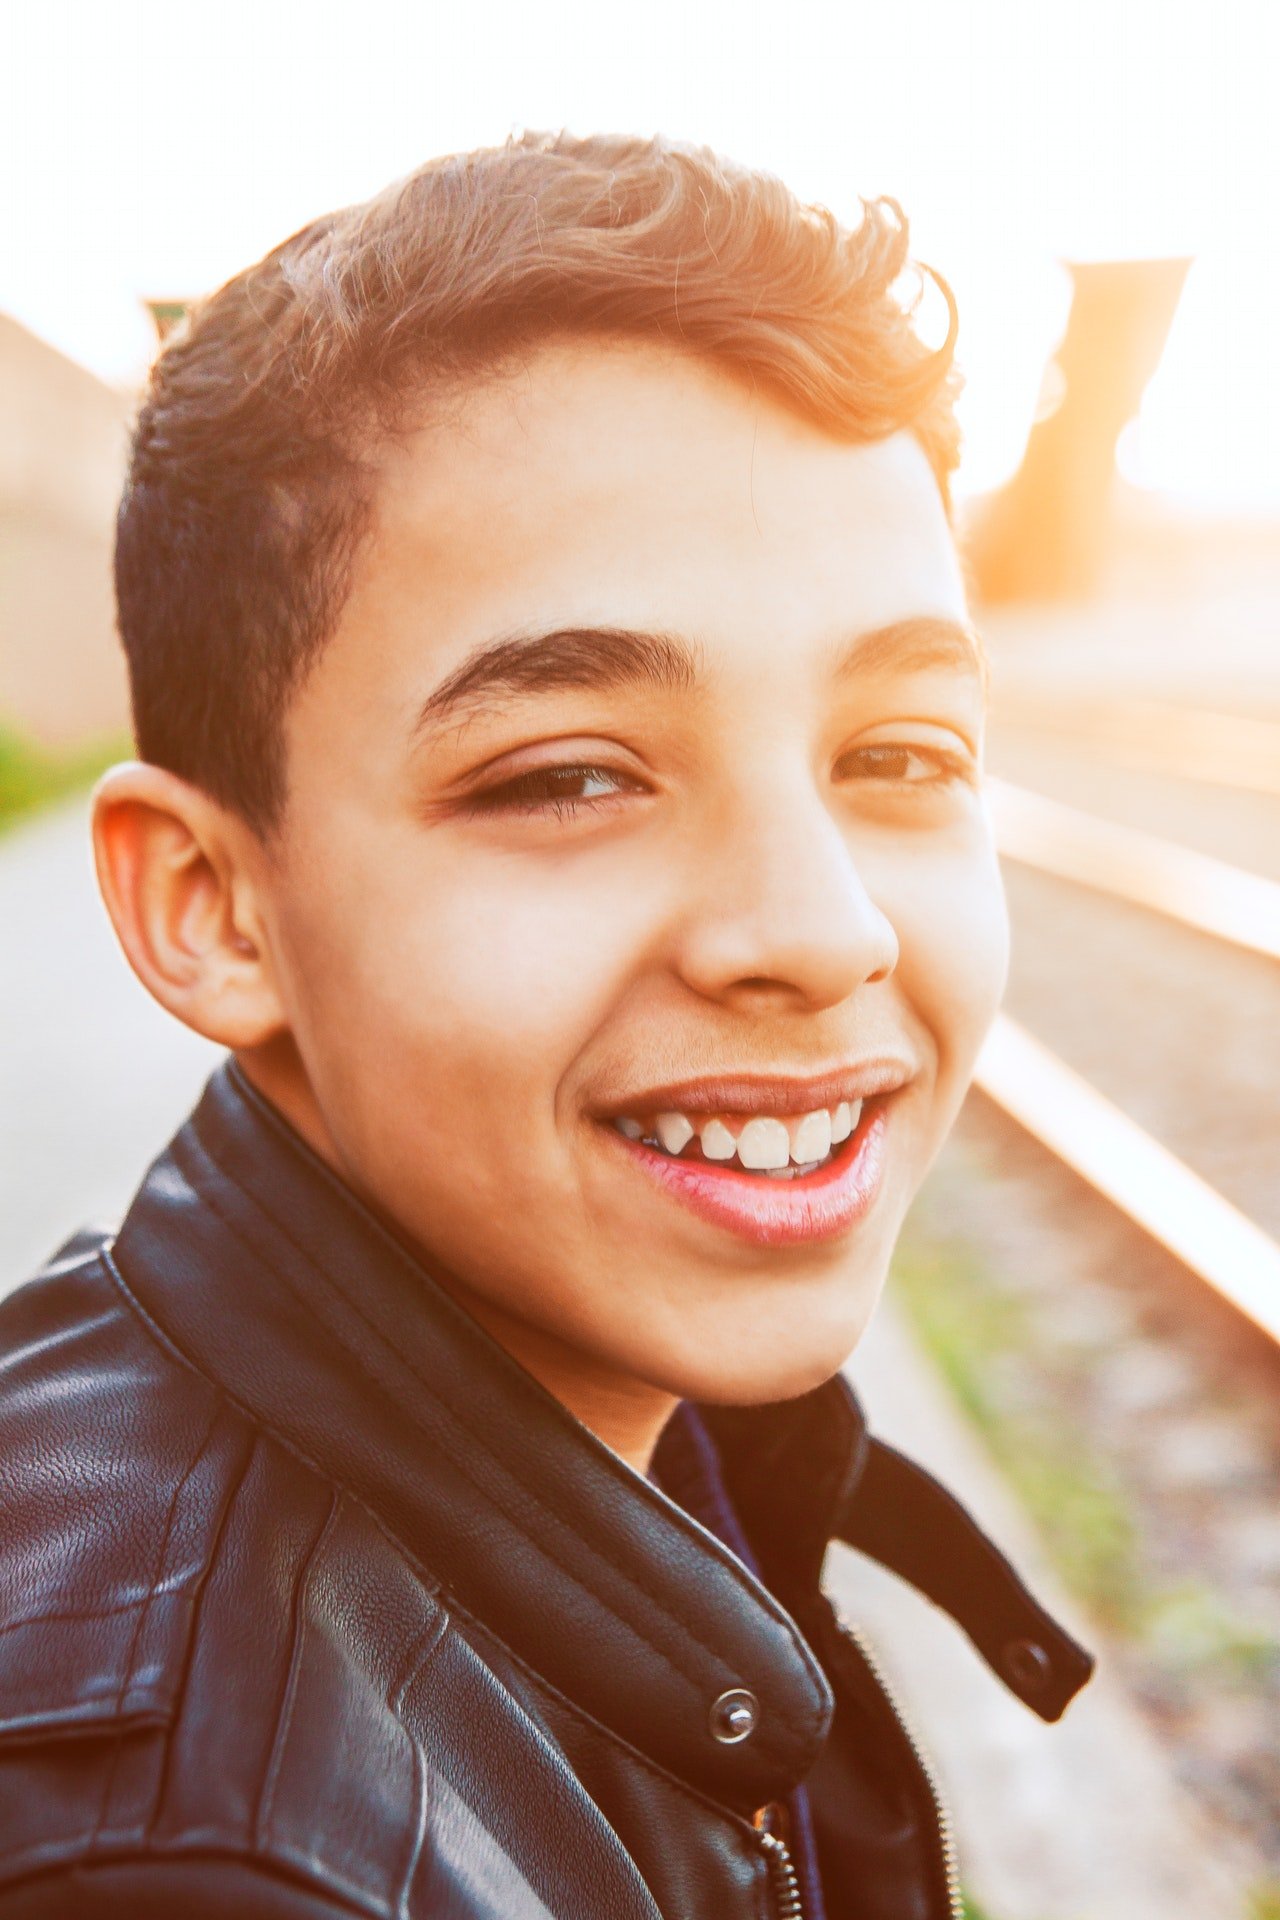 Photo of a young boy smiling | Photo: Pexels